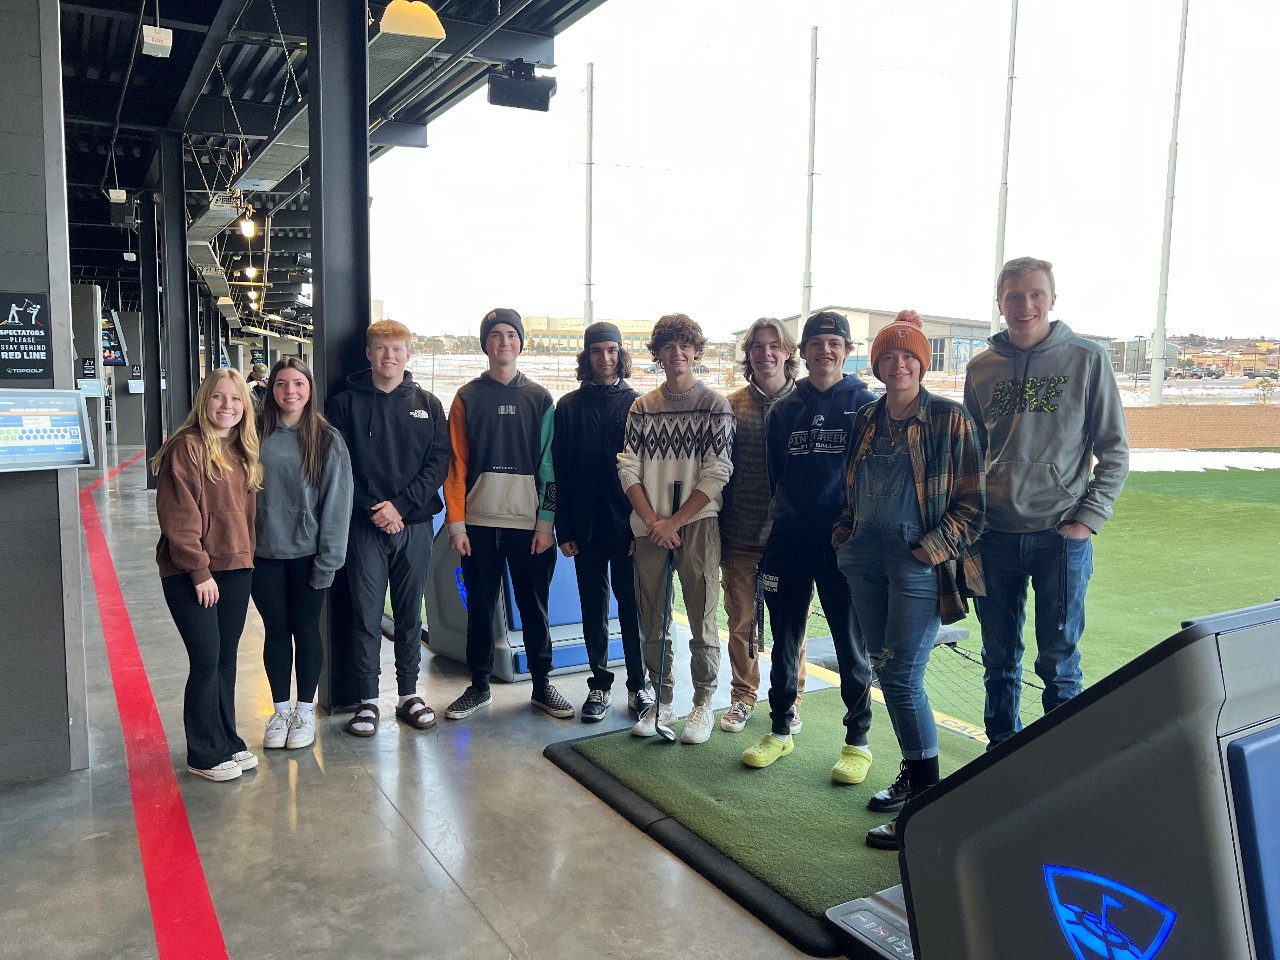 Students pose for a photo at TopGolf.